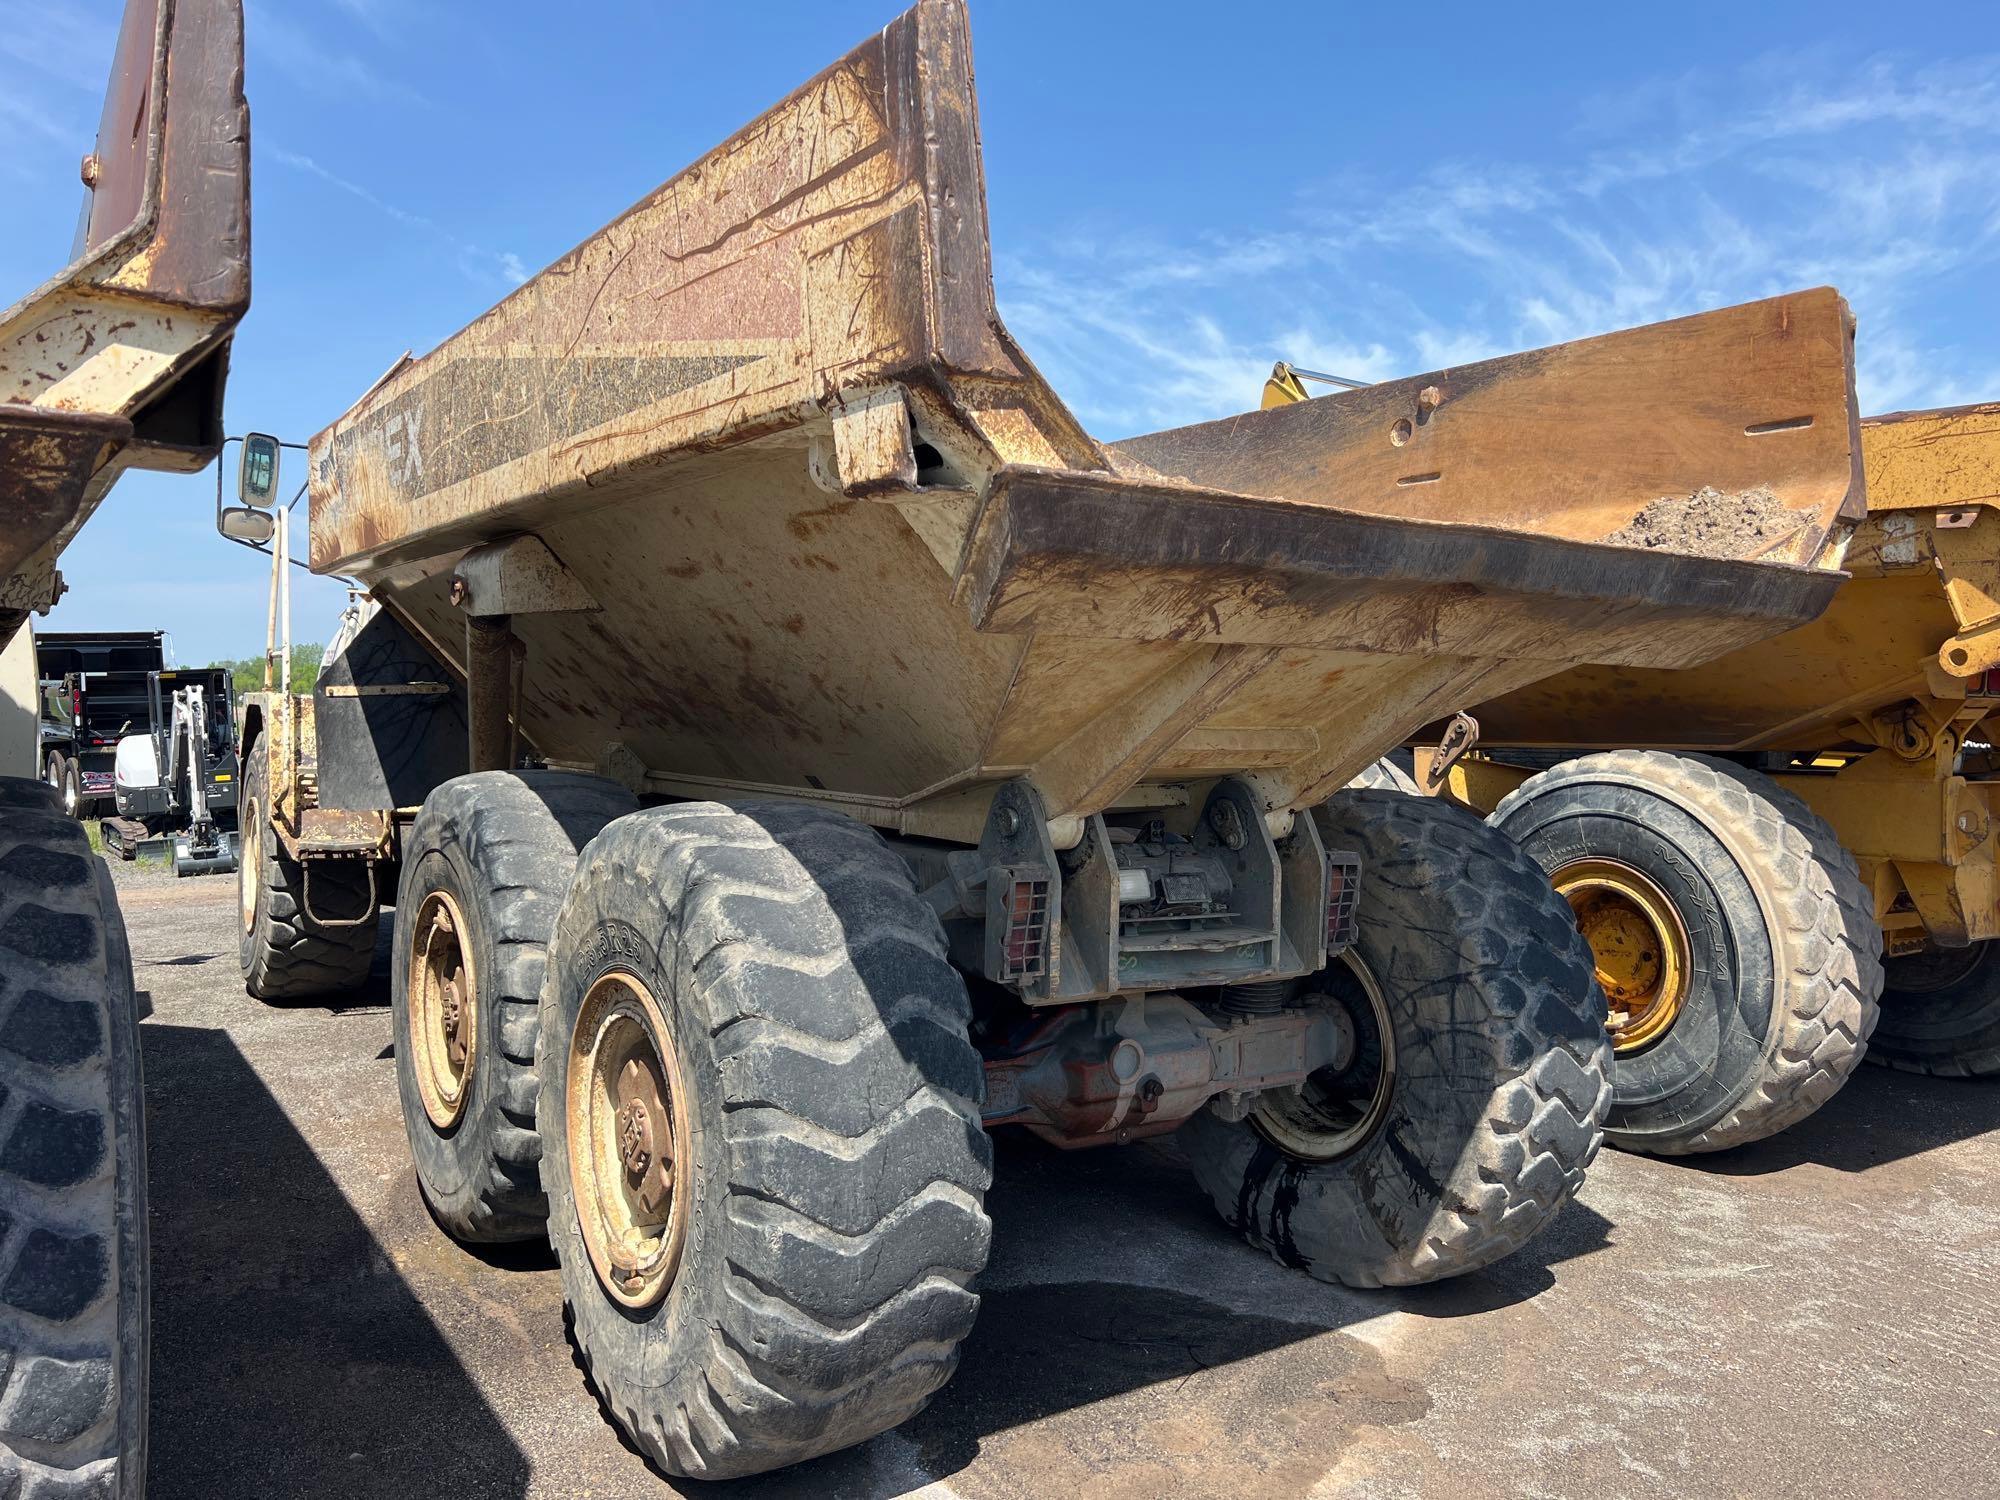 TEREX TA30 ARTICULATED HAUL TRUCK SN:A8941087 6x6, powered by diesel engine, equipped with Cab,